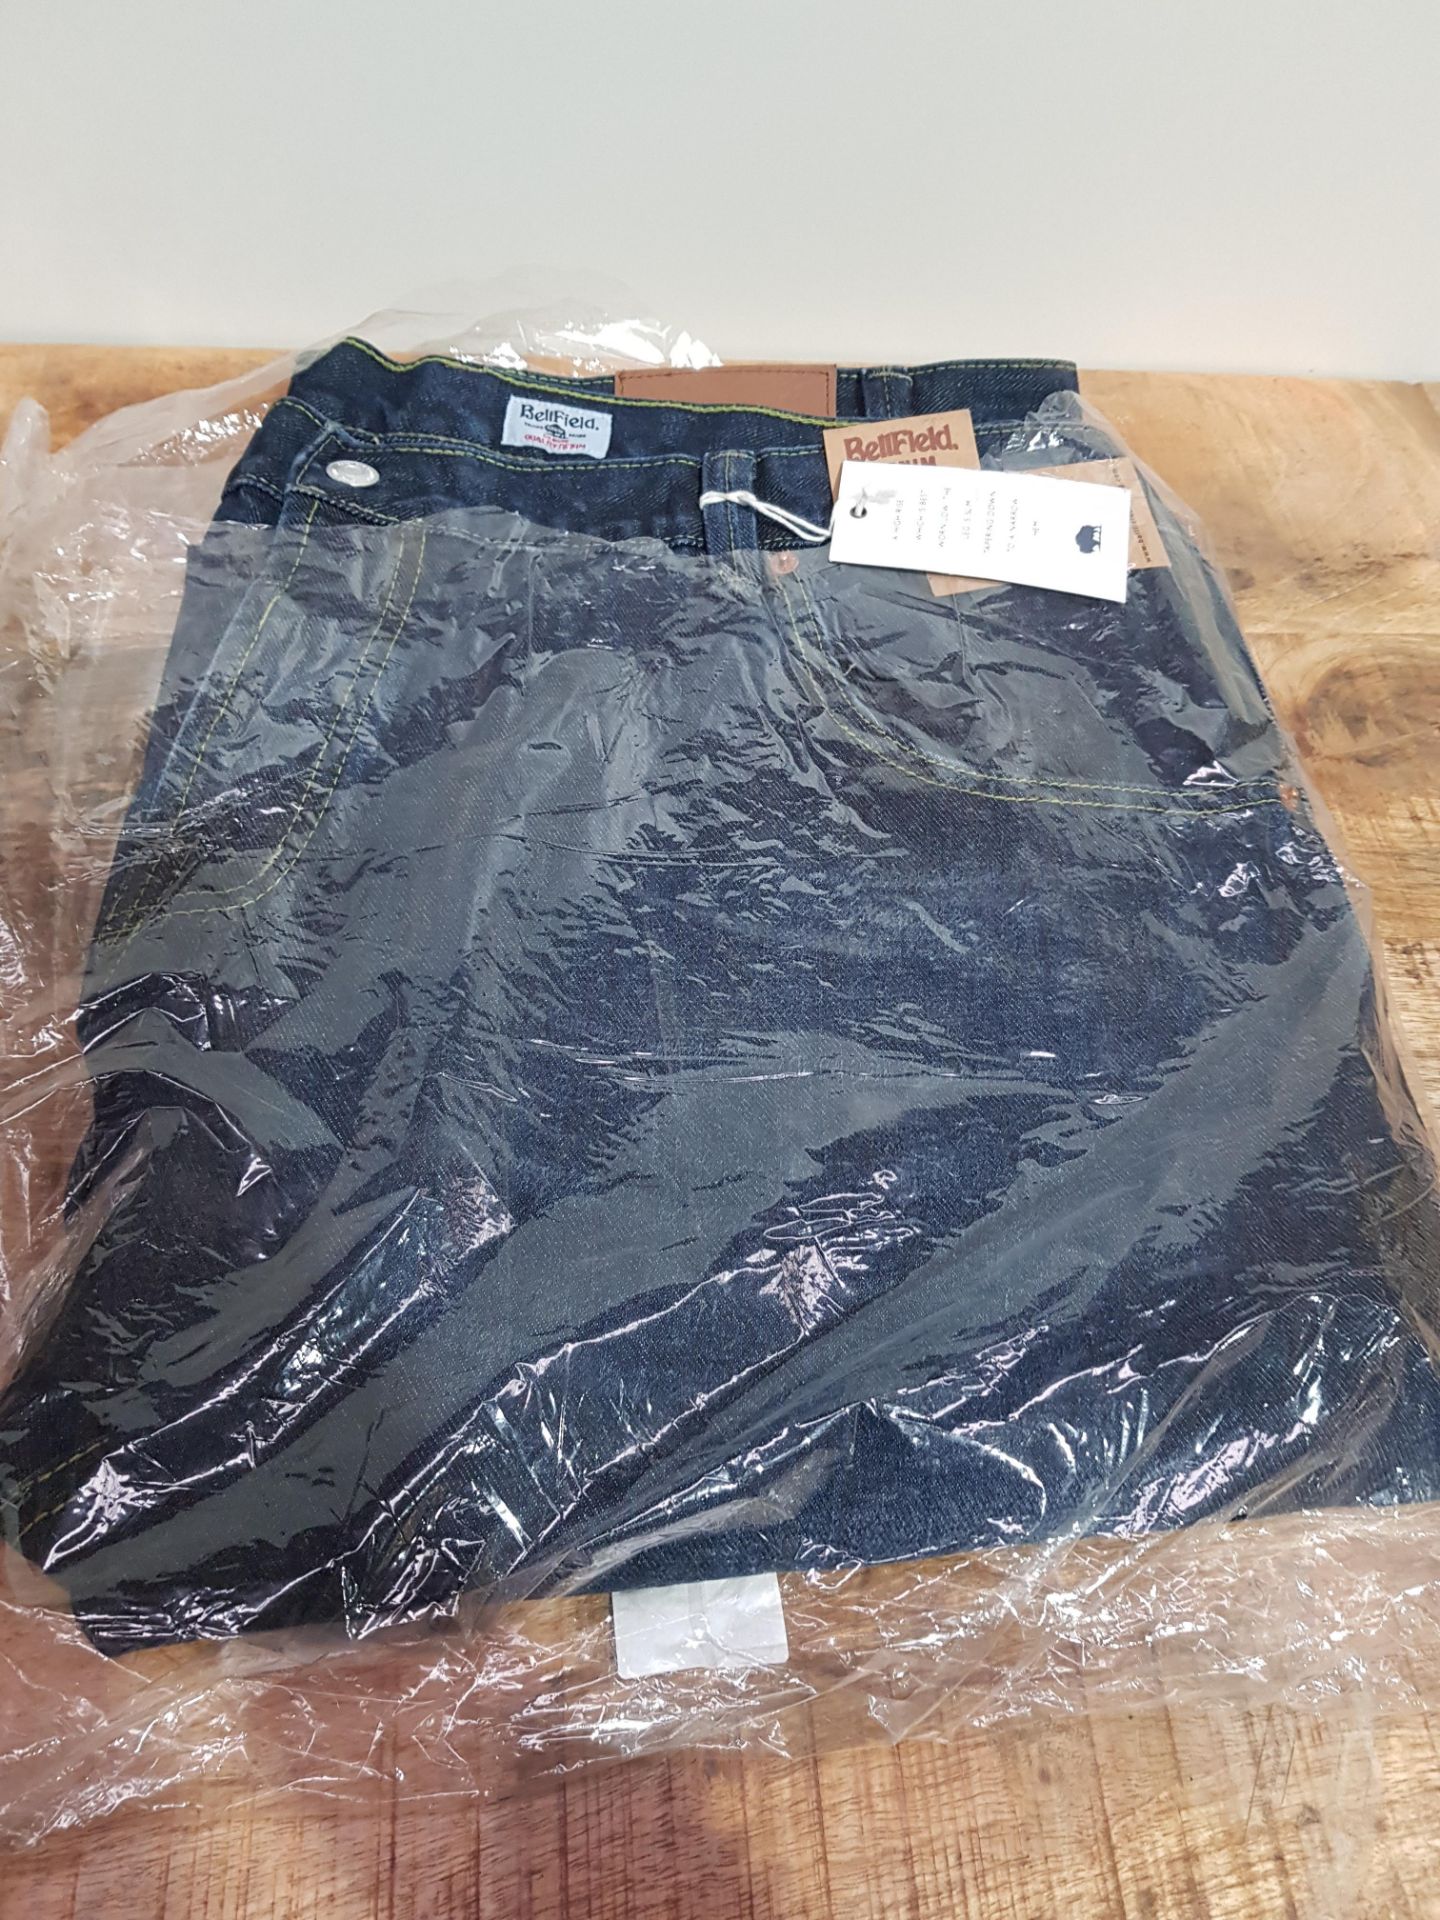 BRAND NEW BELLFIELD JEANS SIZE 50S (KS494)Condition ReportBRAND NEW